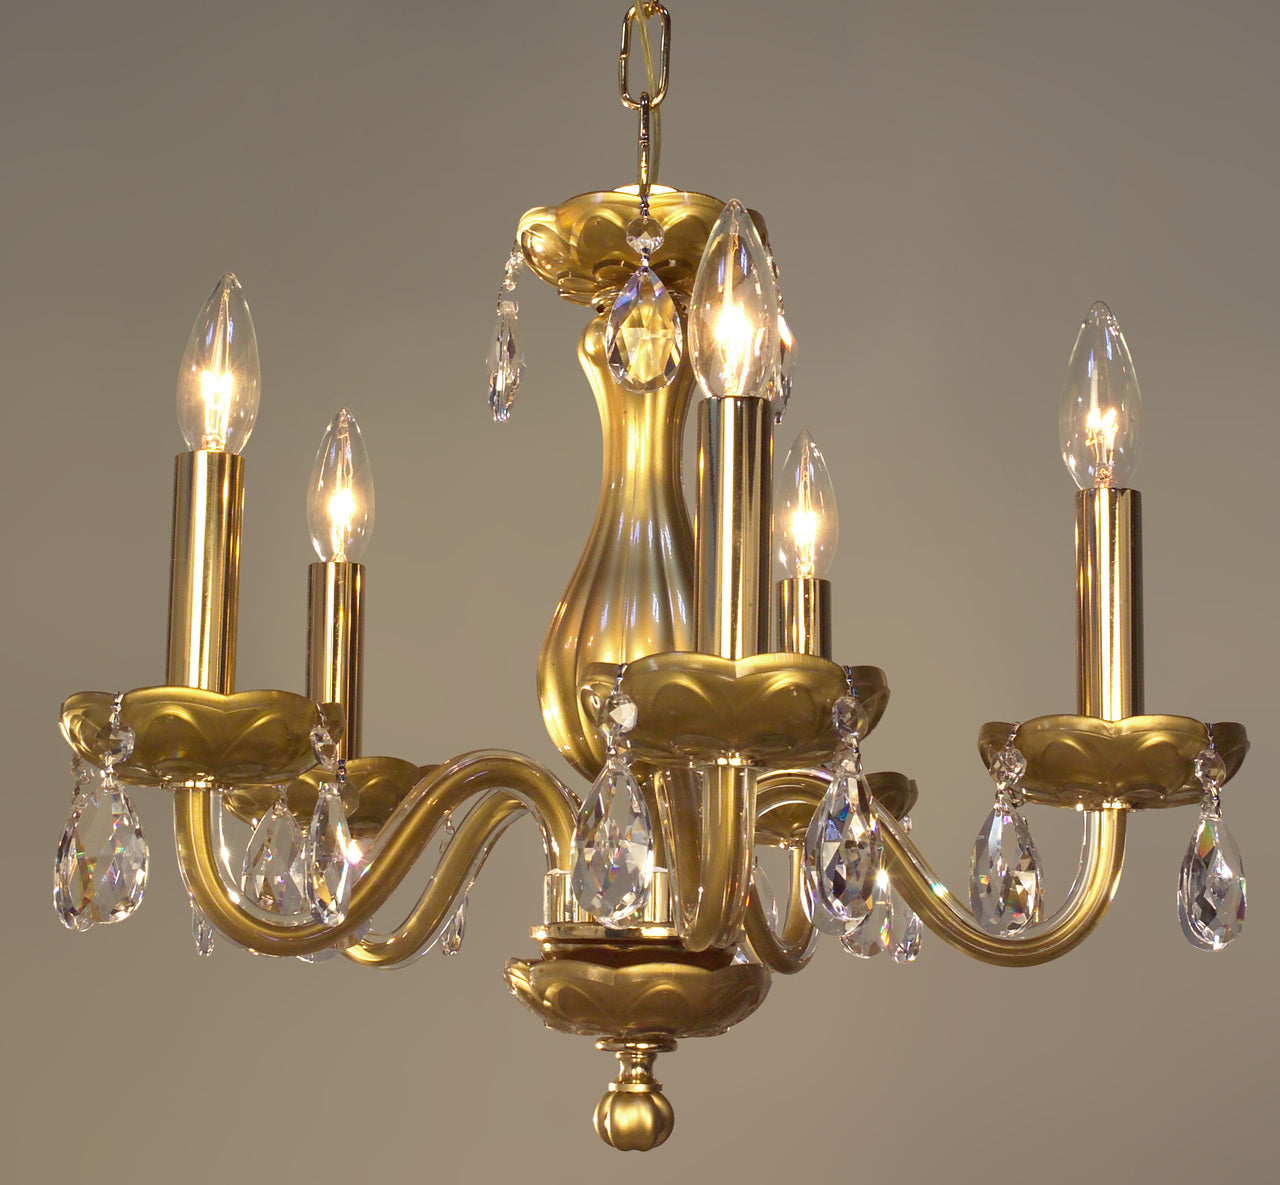 Classic Lighting 82045 GLD CPPR Monaco Crystal Chandelier in Gold (Imported from Spain)